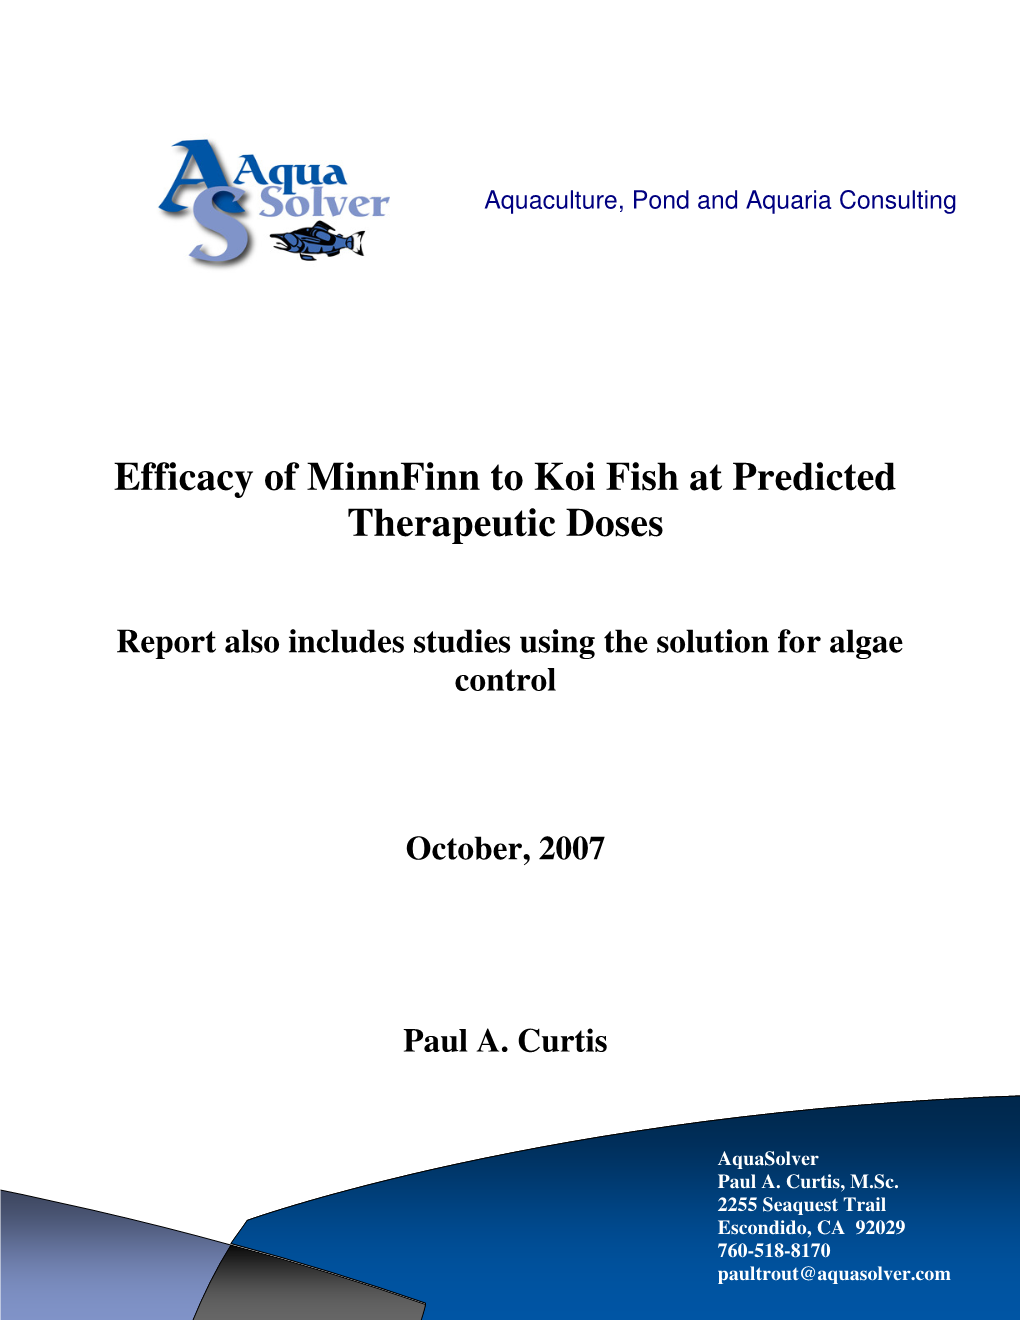 Efficacy of Minnfinn to Koi Fish at Predicted Therapeutic Doses